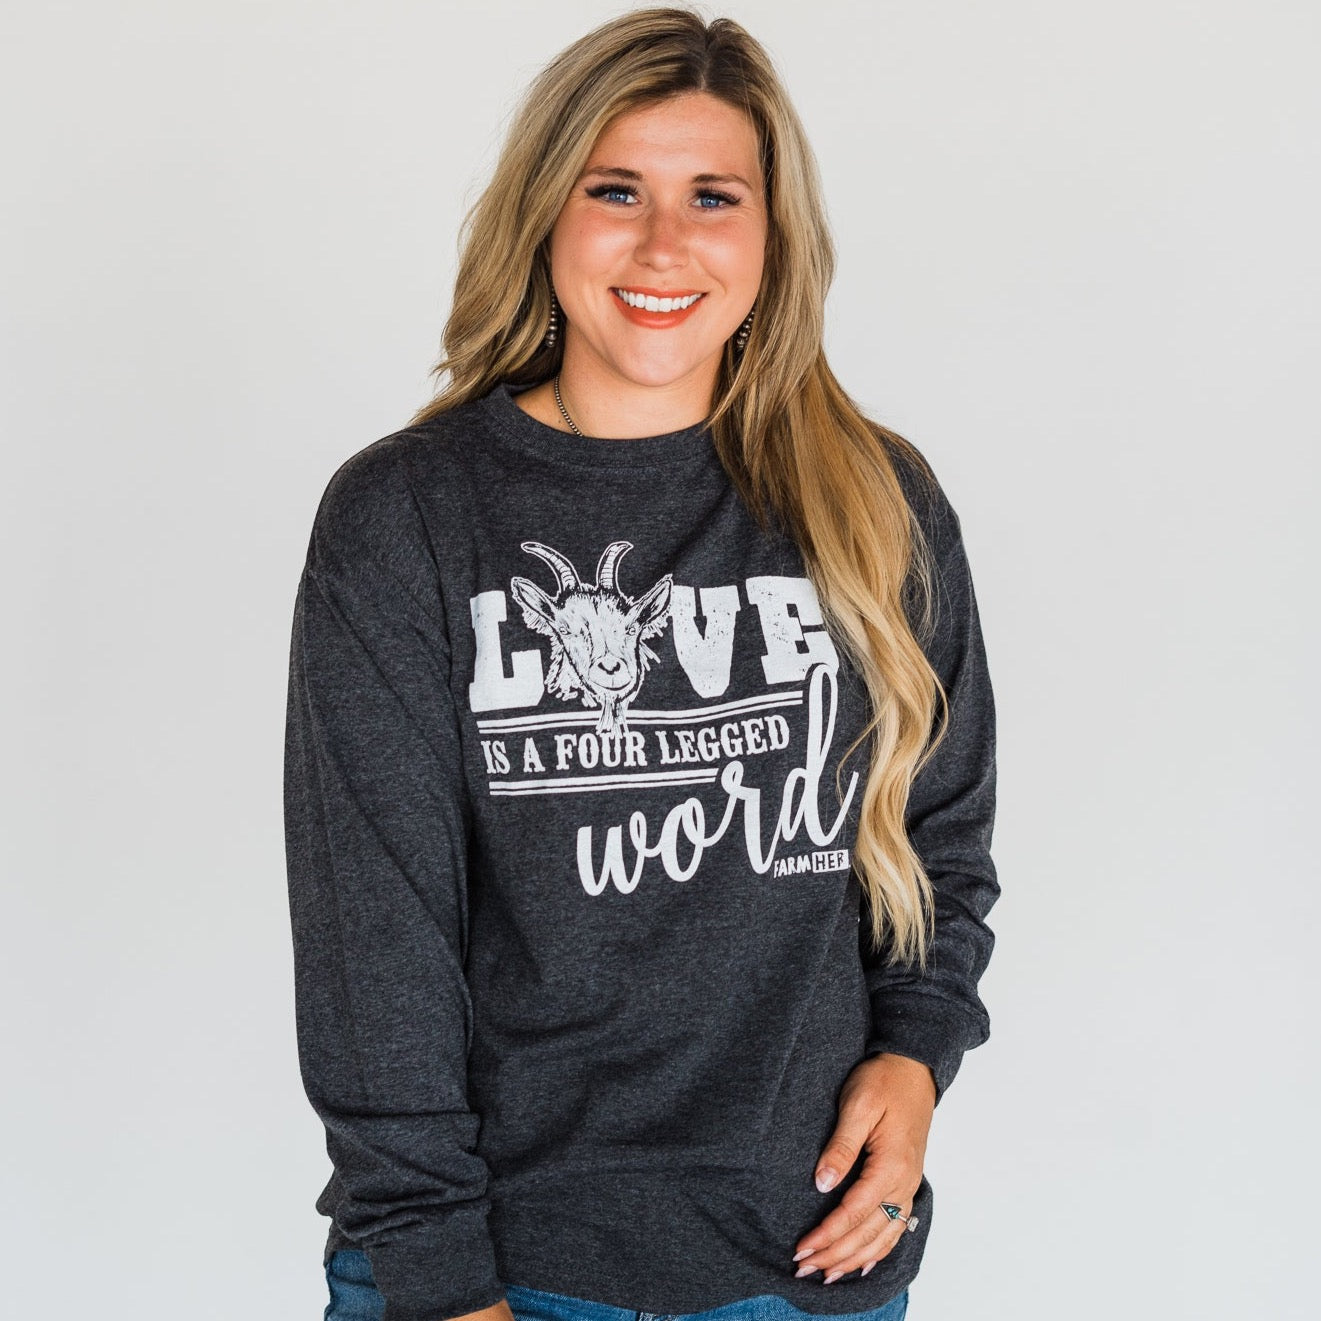 "Goat Love is a Four Letter Word" FarmHer Long Sleeve Graphic Tee